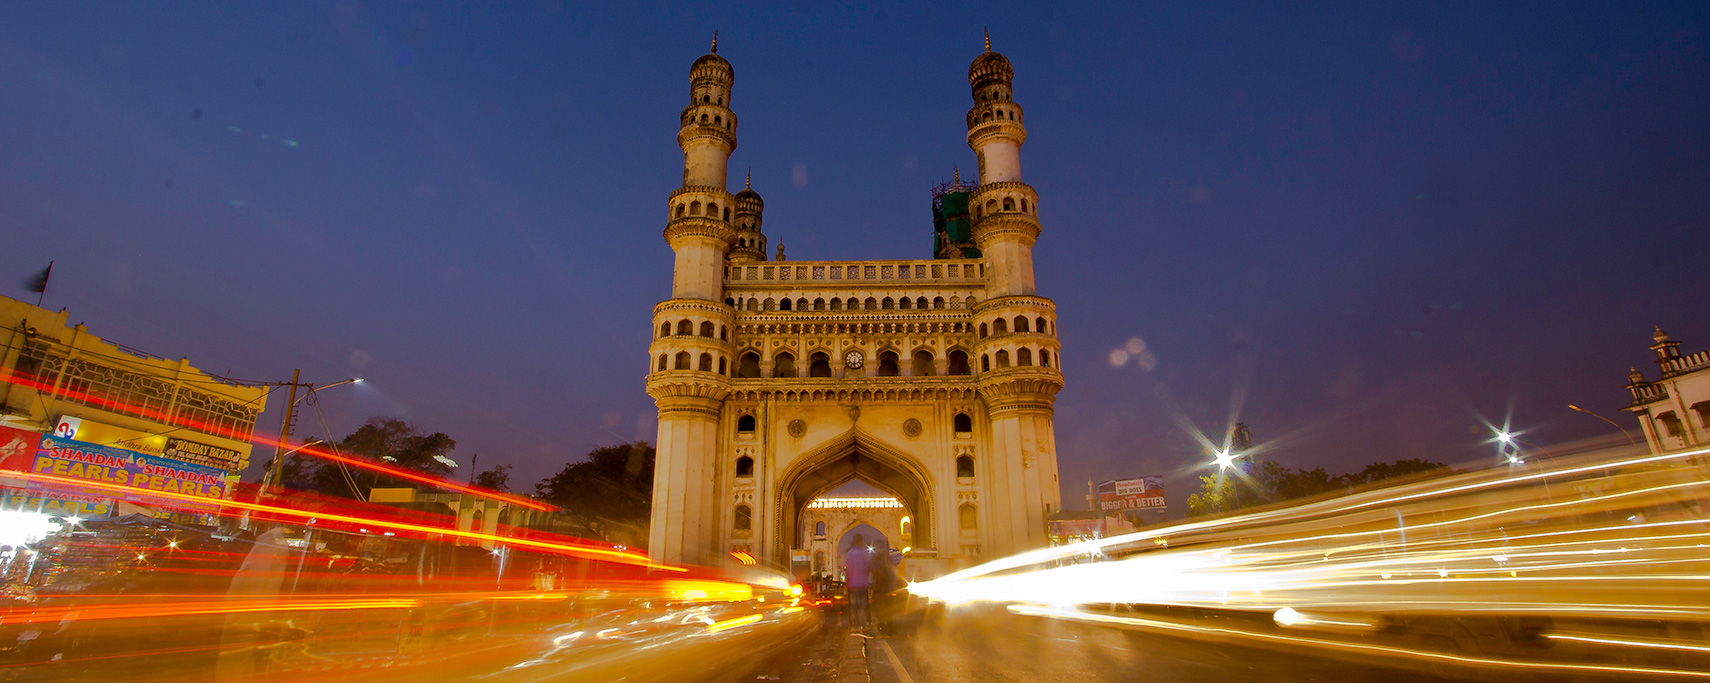 Charminar mosque in Hyderabad at night